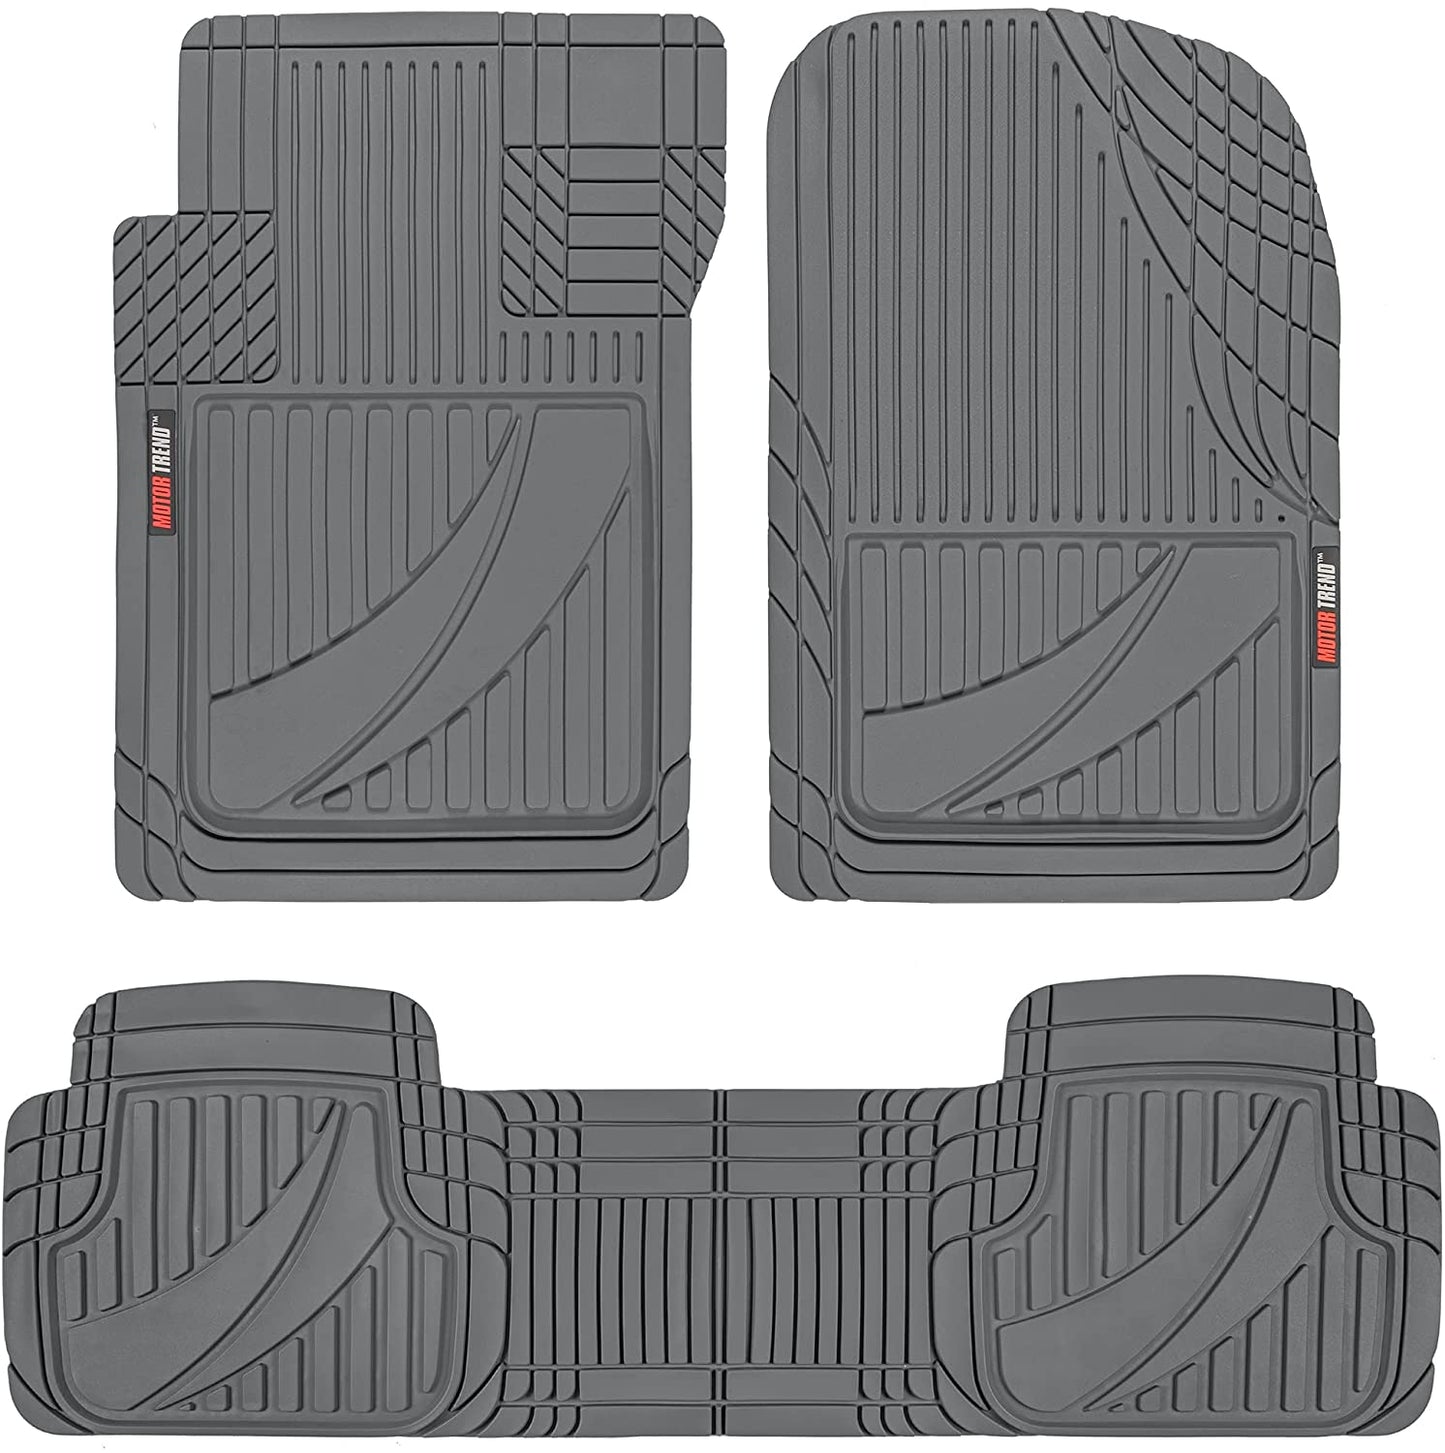 FlexTough Advanced Black Rubber Car Floor Mats - 3 Piece Front & Rear Trim to Fit Floor Mats for Cars Truck SUV, All Weather Automotive Liners with Traction Grips and Multiple Trim Lines